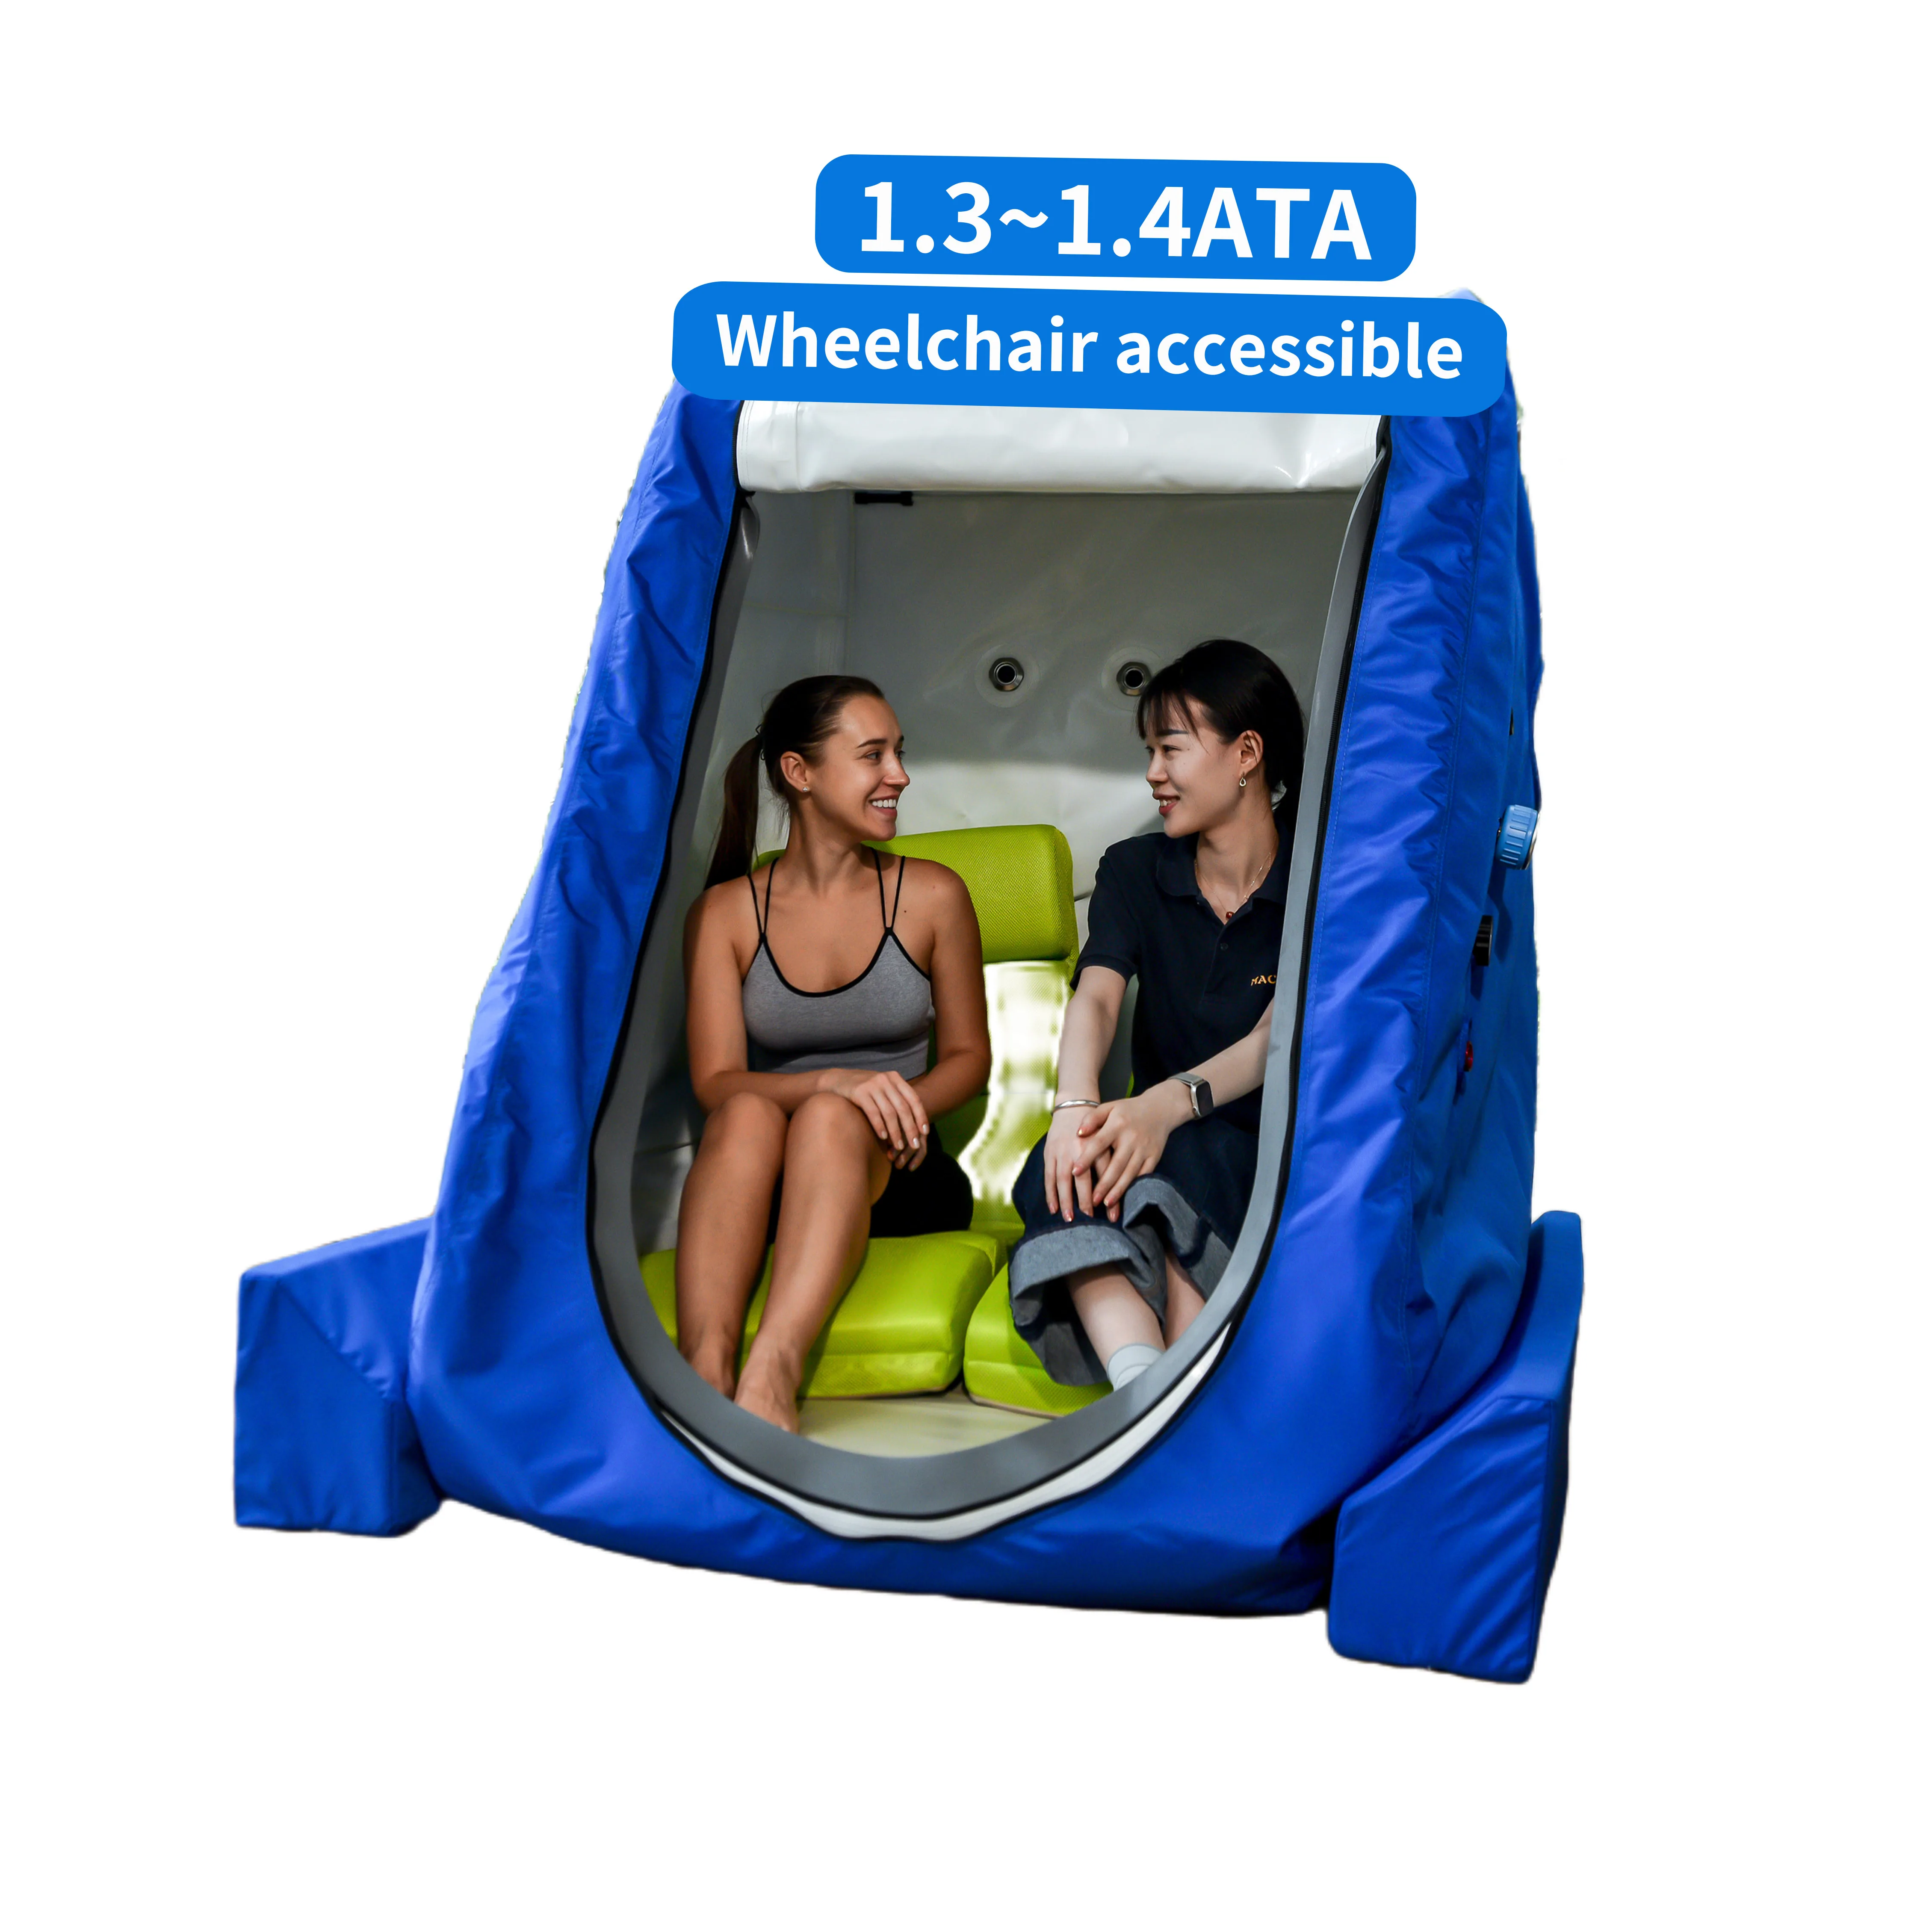 MACY-PAN 2 person hyperbaric oxygen therapy wheelchair accessib home us 1.3ATA portable hyperbaric chamber health care supplies